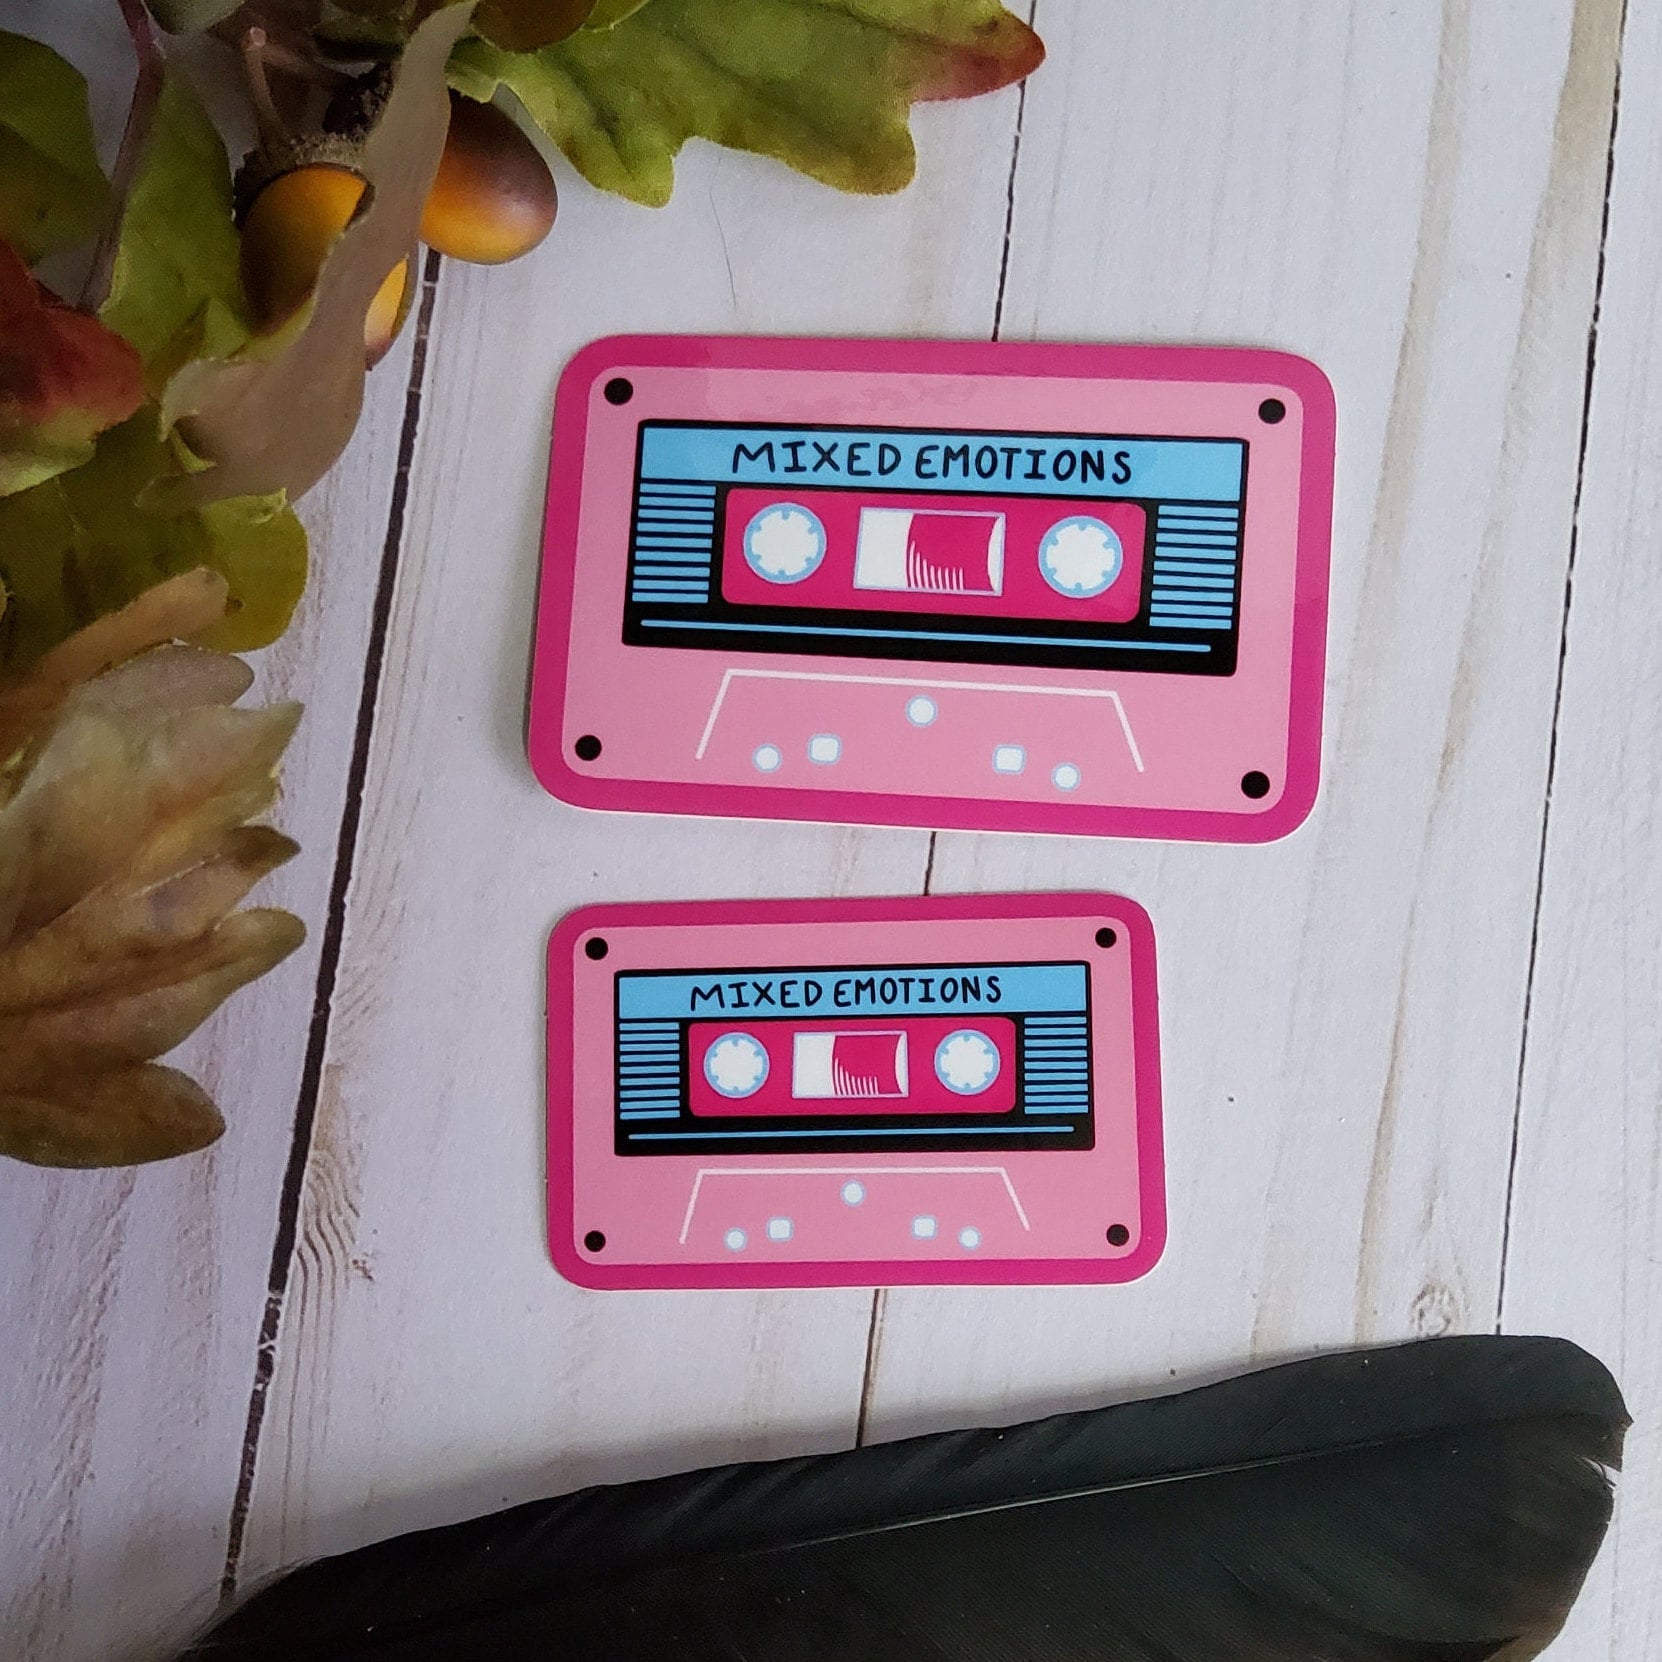 GLOSSY STICKER: Mixed Emotions Cassette Tape Sticker , Cassette Sticker , Mix Tape , Mix Tape Stickers , 80s Stickers , 80s Vibe Sticker